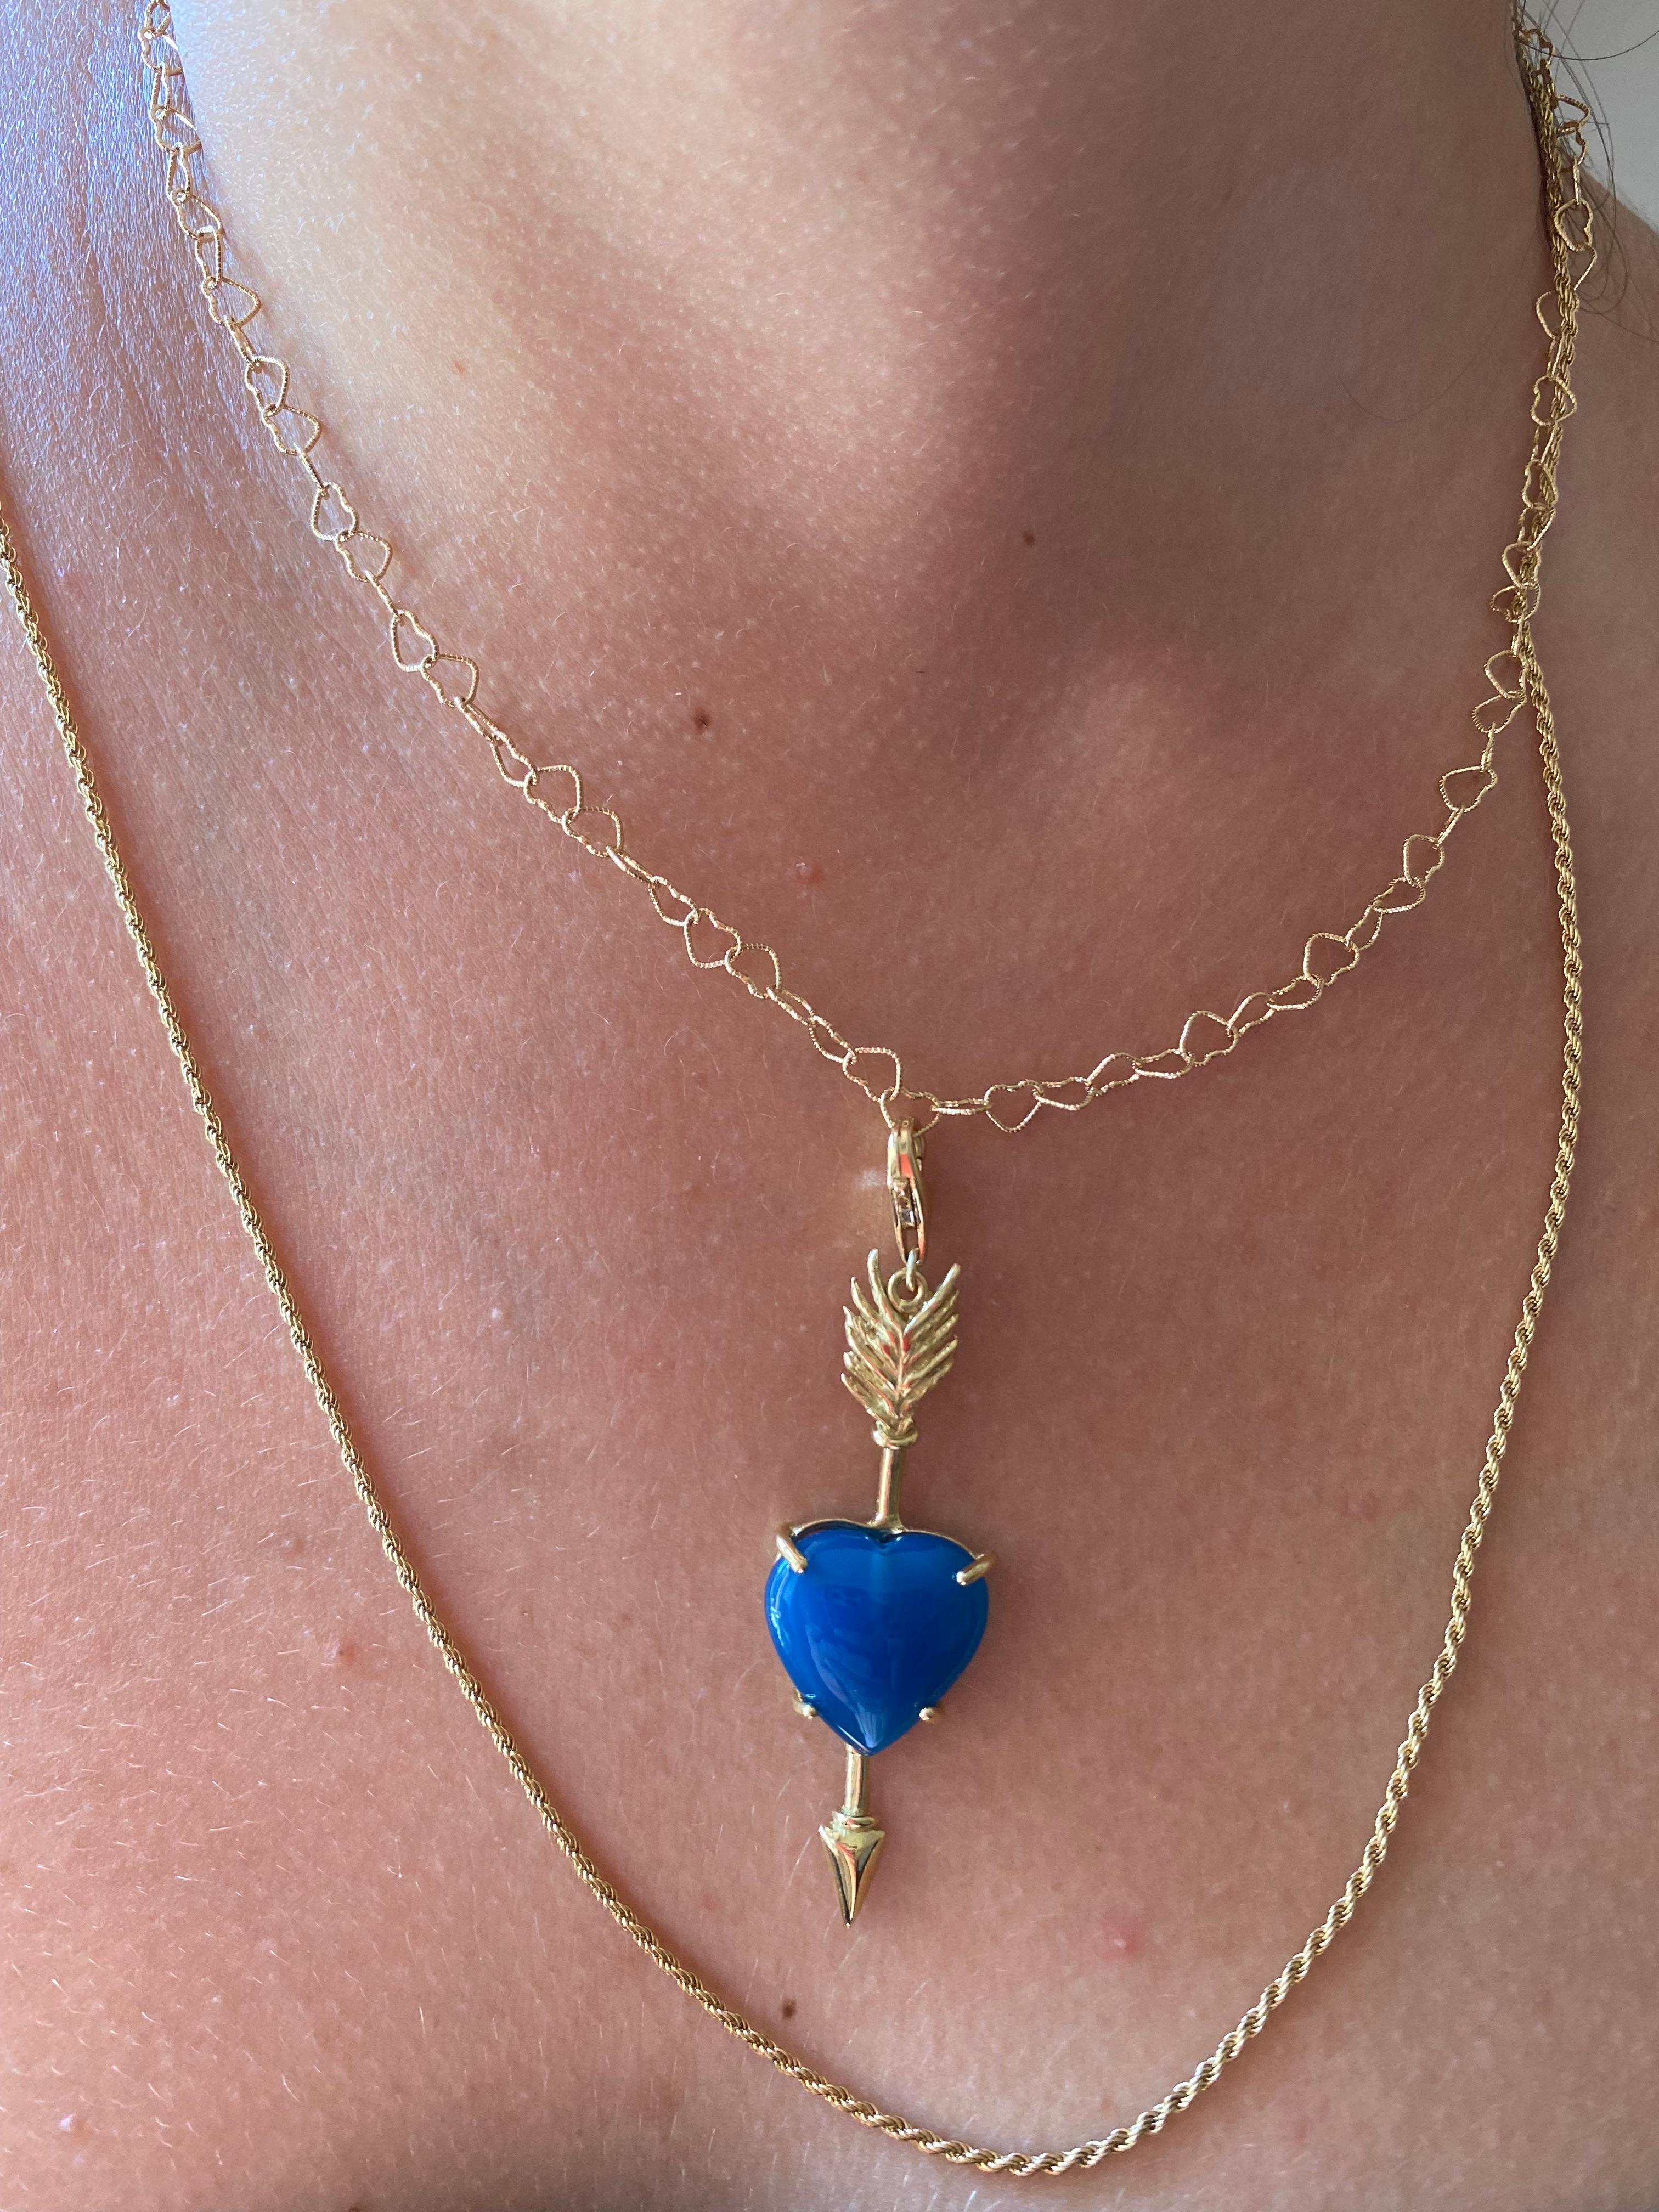  Rossella Ugolini Design Collection  a nice pendant handcrafted in 18 karats gold adorned with beautiful deep blue heart shaped agate. A love gift openly inspired by the meaning of the Heart with the Arrow linked to Love, Cupid, Emotion. This charm